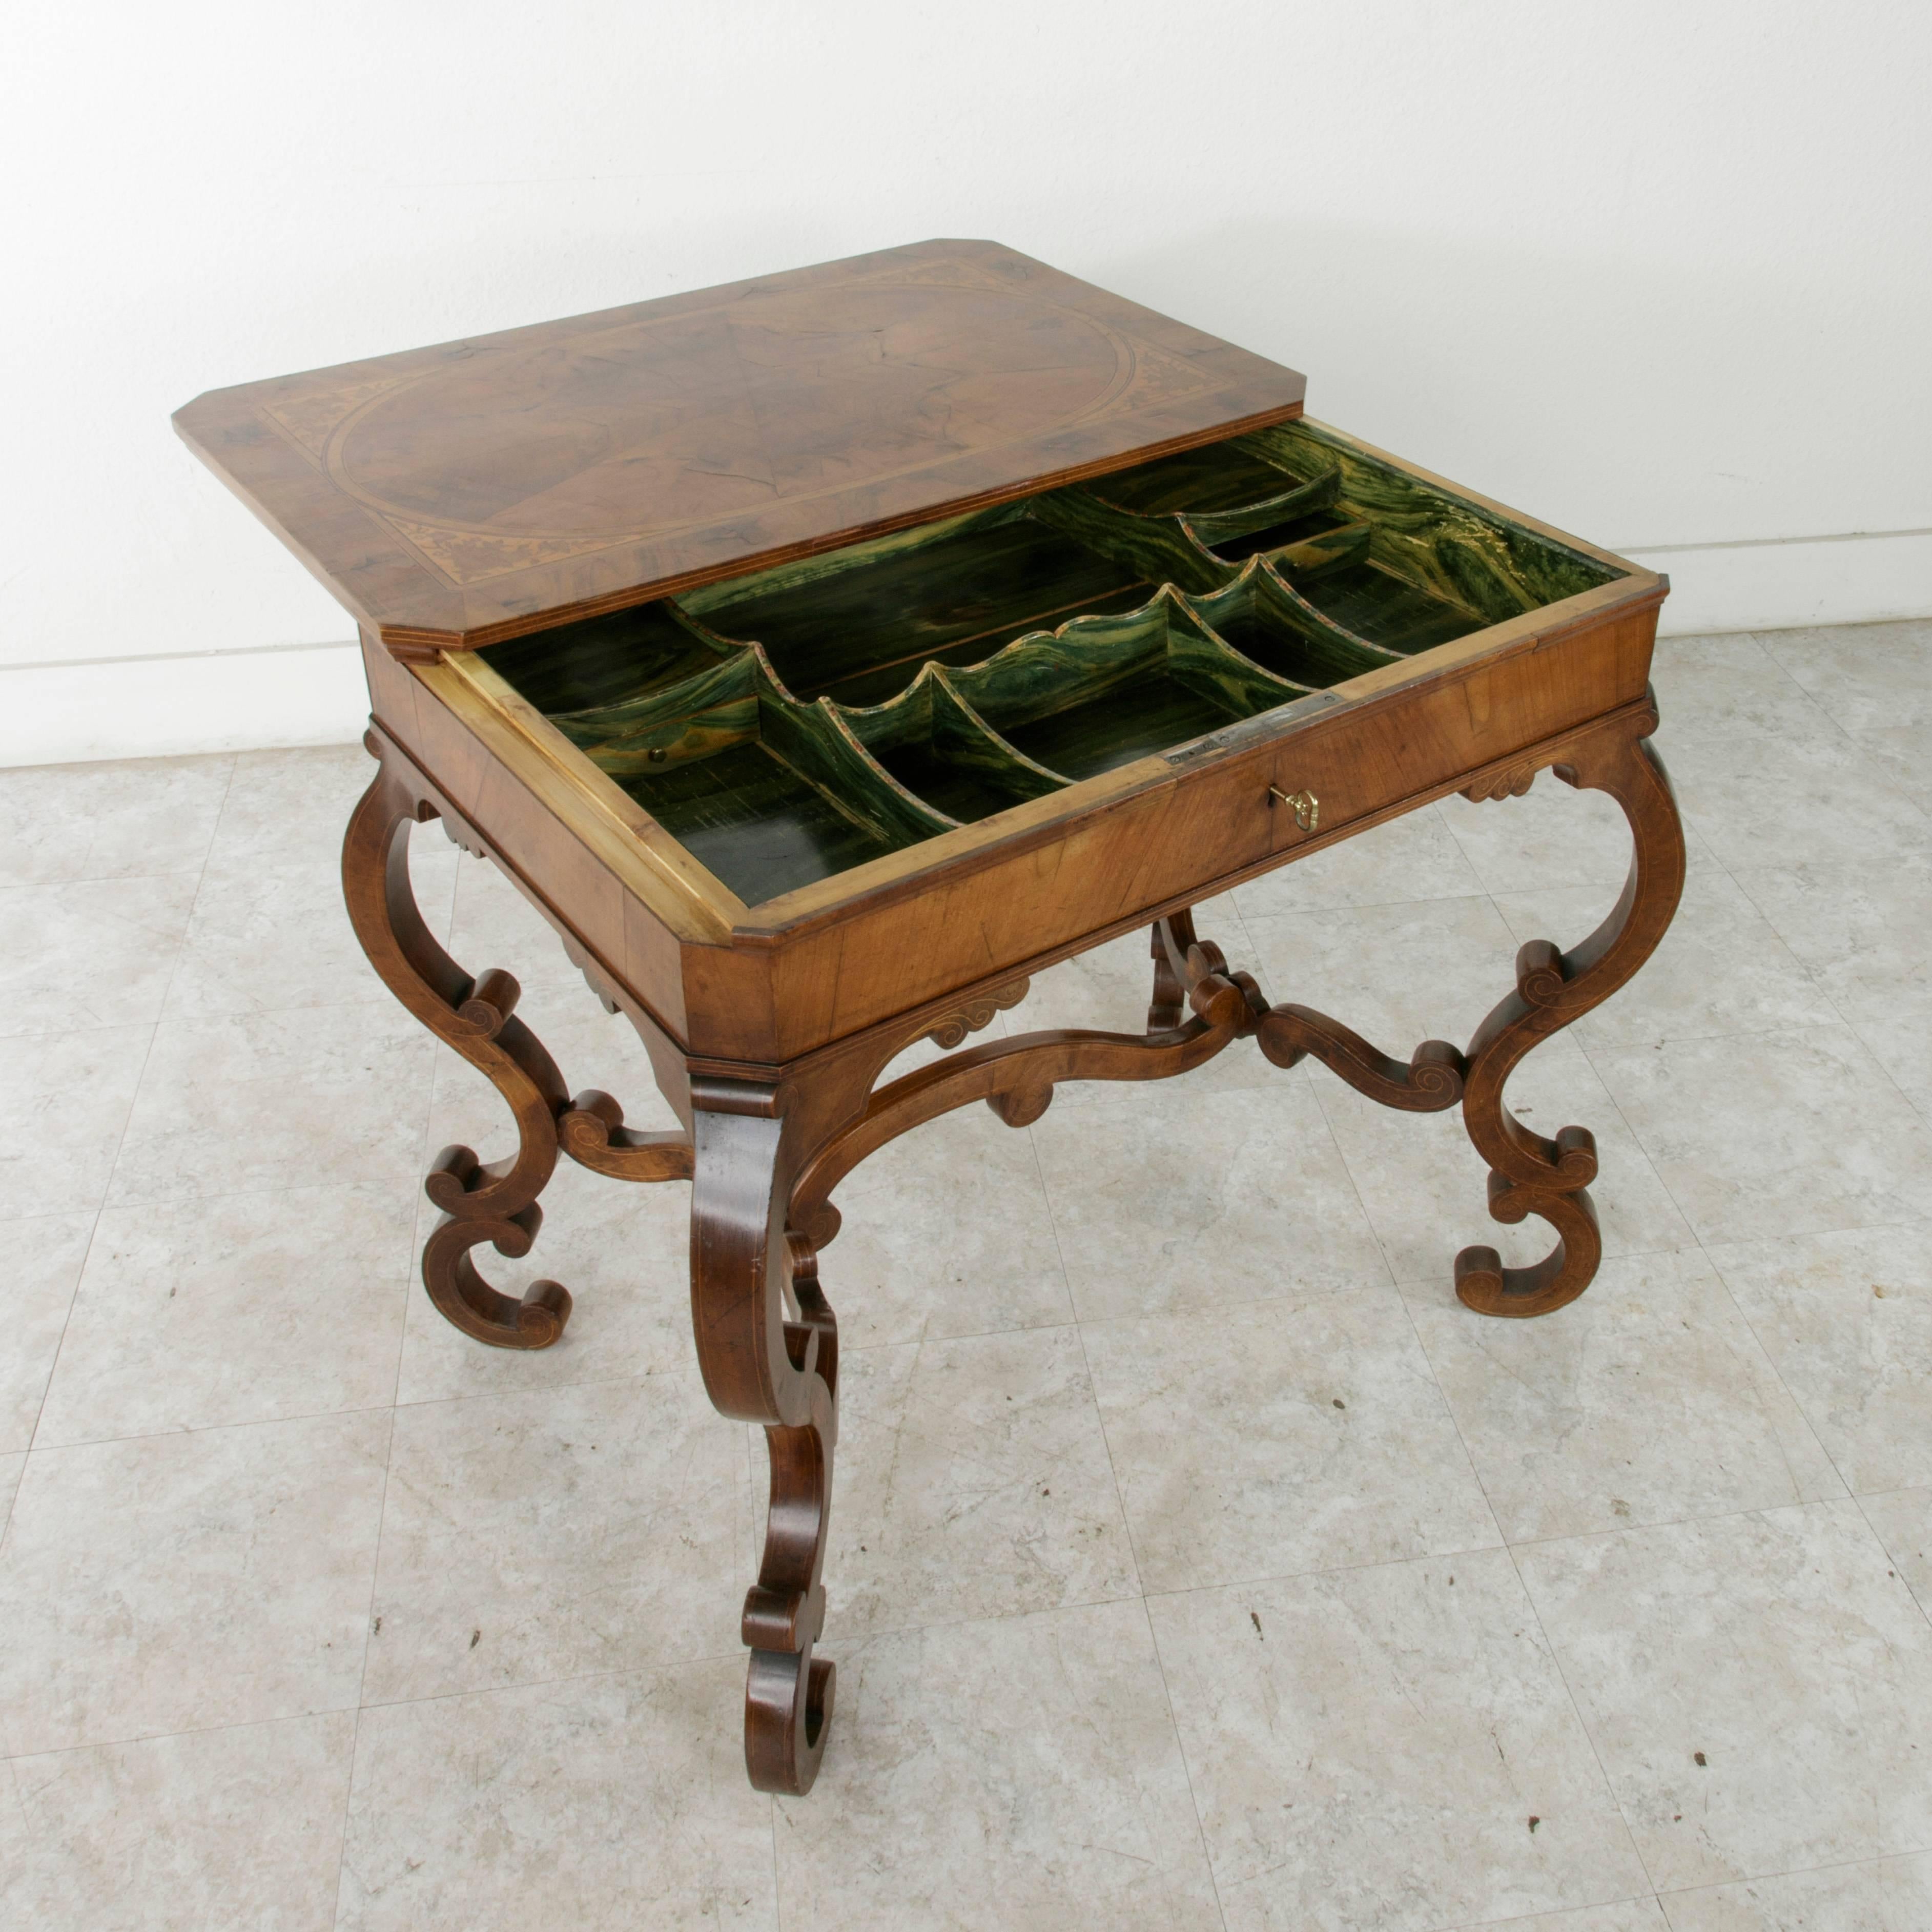 This 18th century walnut and lemon wood marquetry table from Italy was originally used by a money changer. The characteristic feature of a money changer's table is its top which slides forward, obliging the client to step away while the money